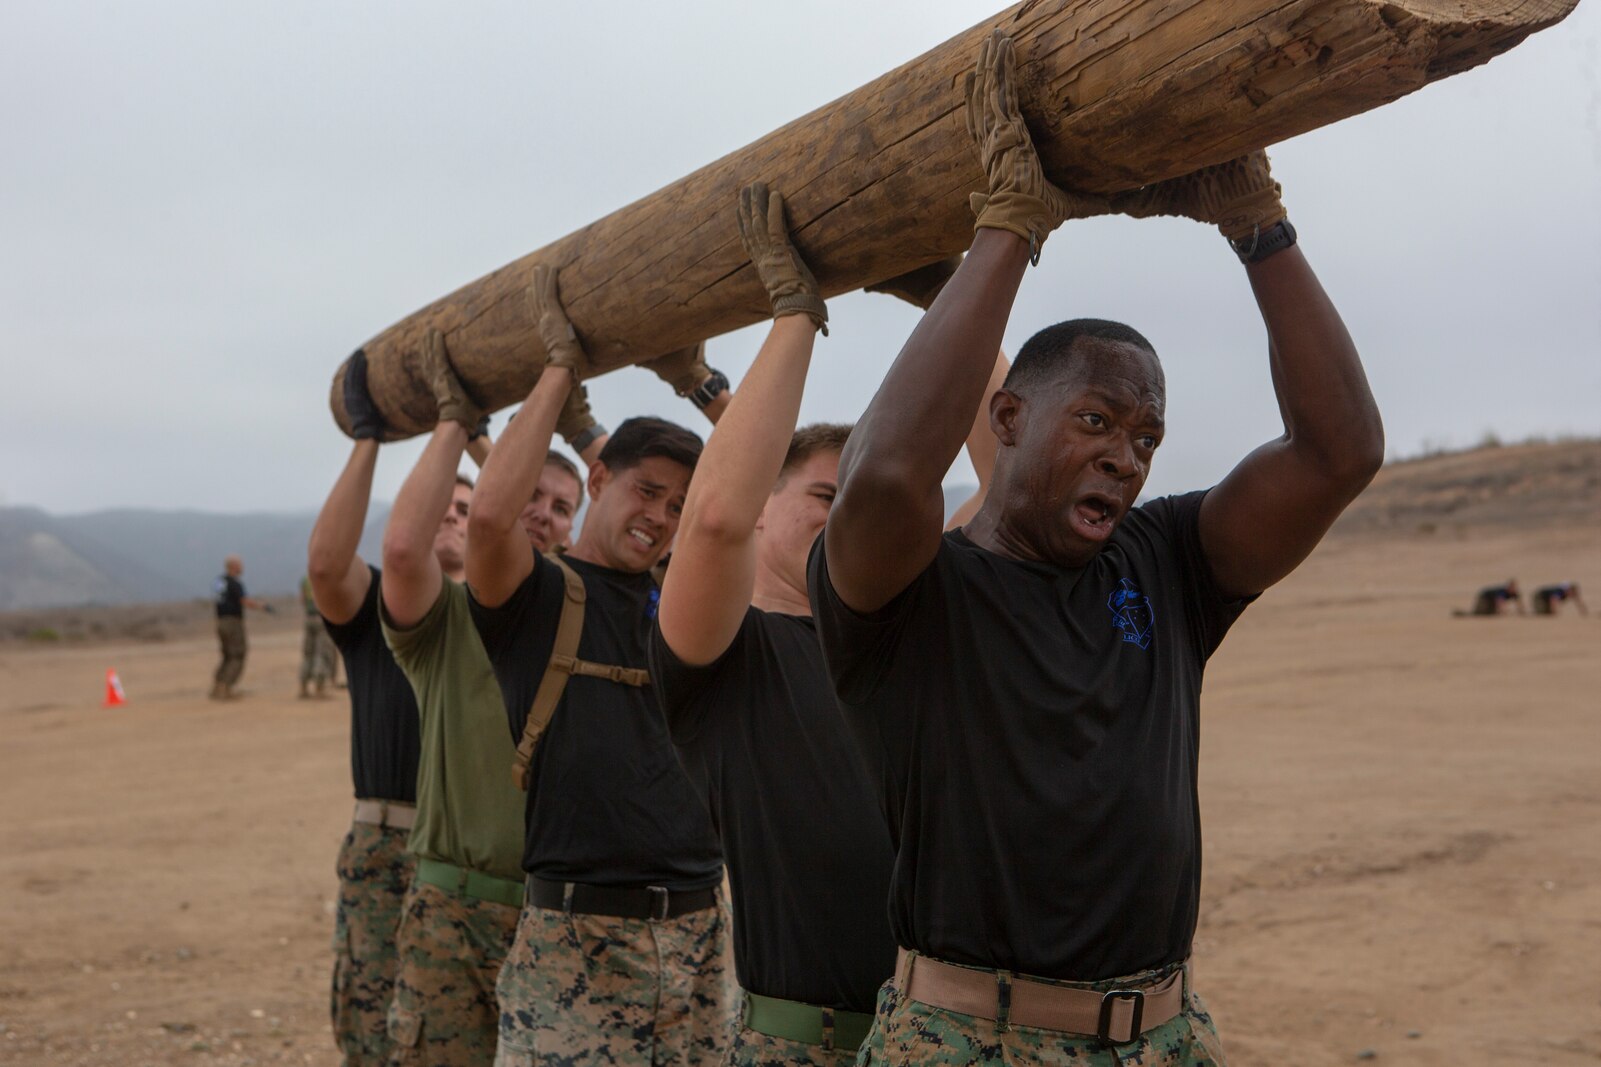 U.S. Marines with 1st Air Naval Gunfire Liaison Company, I Marine Expeditionary Force Information Group, lift a log during a physical training event at Marine Corps Base Camp Pendleton, California, Sept. 3, 2021. Marines participate in physically challenging events to improve their physical fitness and build unit cohesion. (U.S Marine Corps photo by Cpl. Nicolas Atehortua)